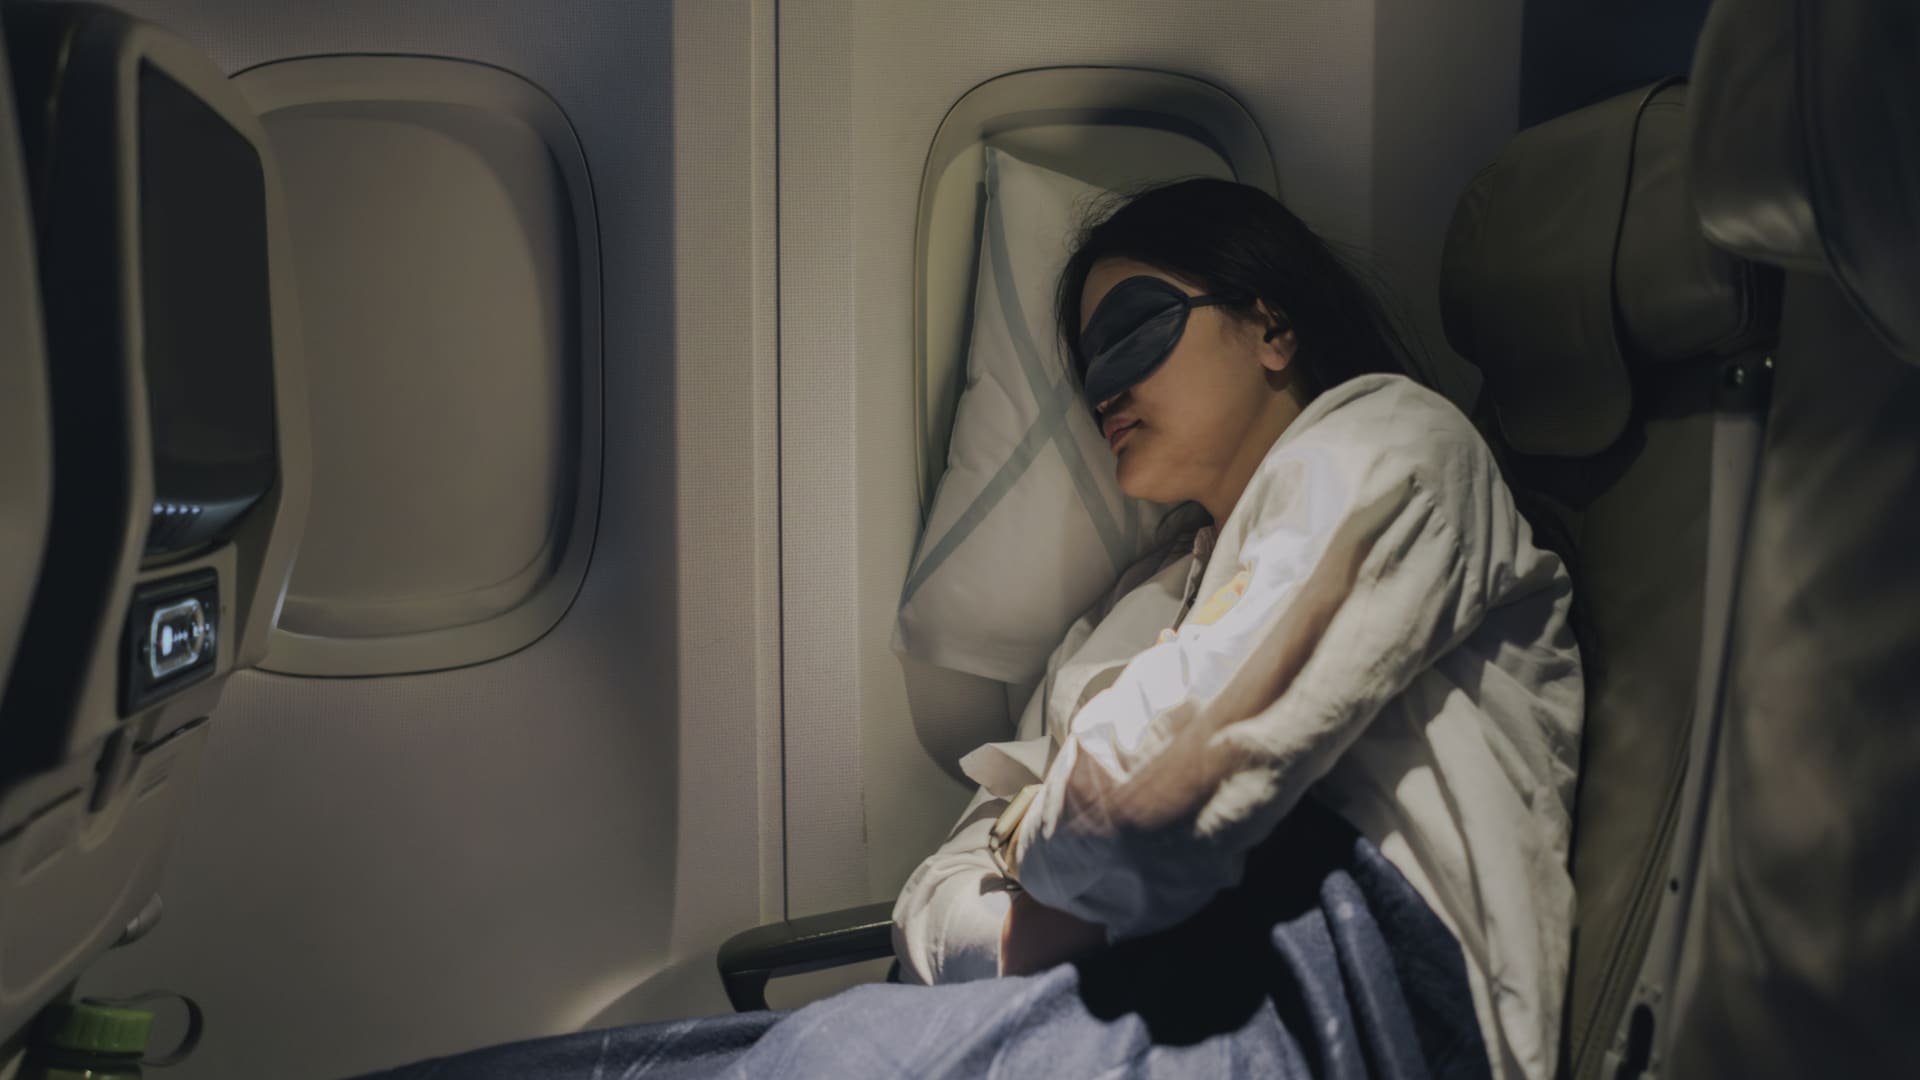 Drinking alcohol before napping on flights presents health risk: study